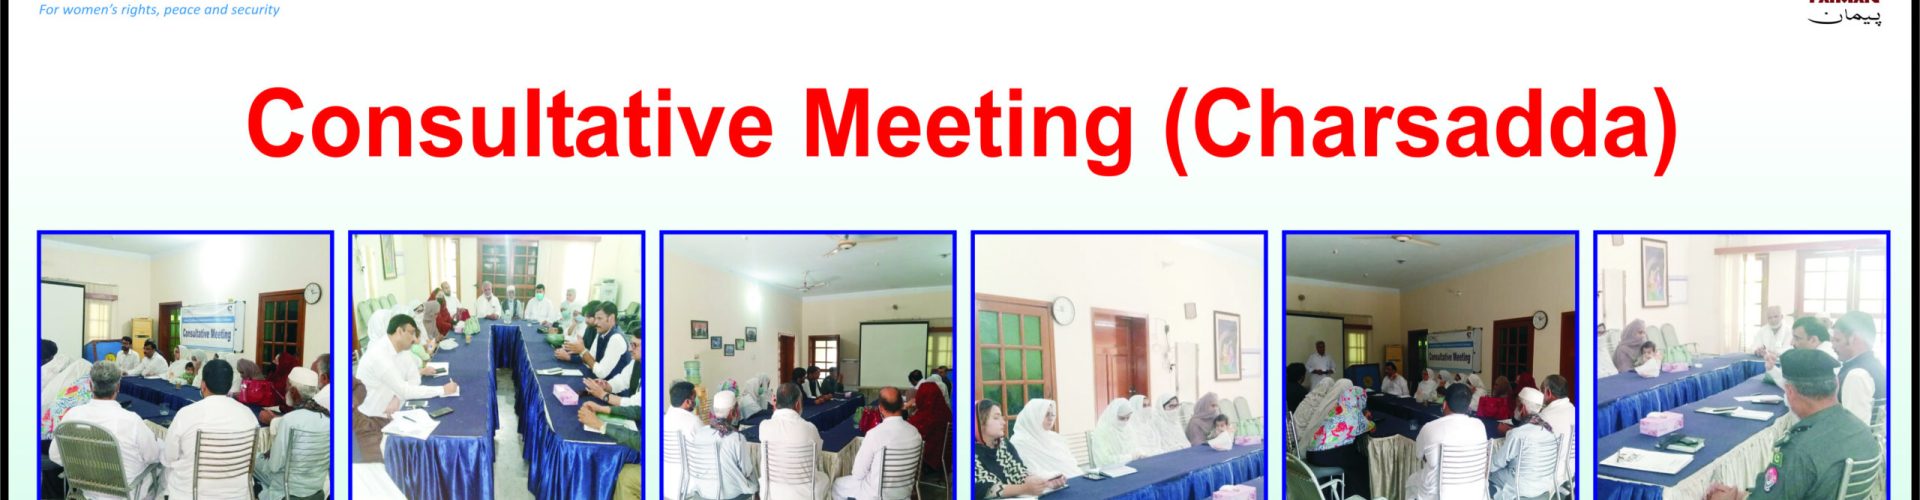 Web Banner ICAN Consultative Meeting